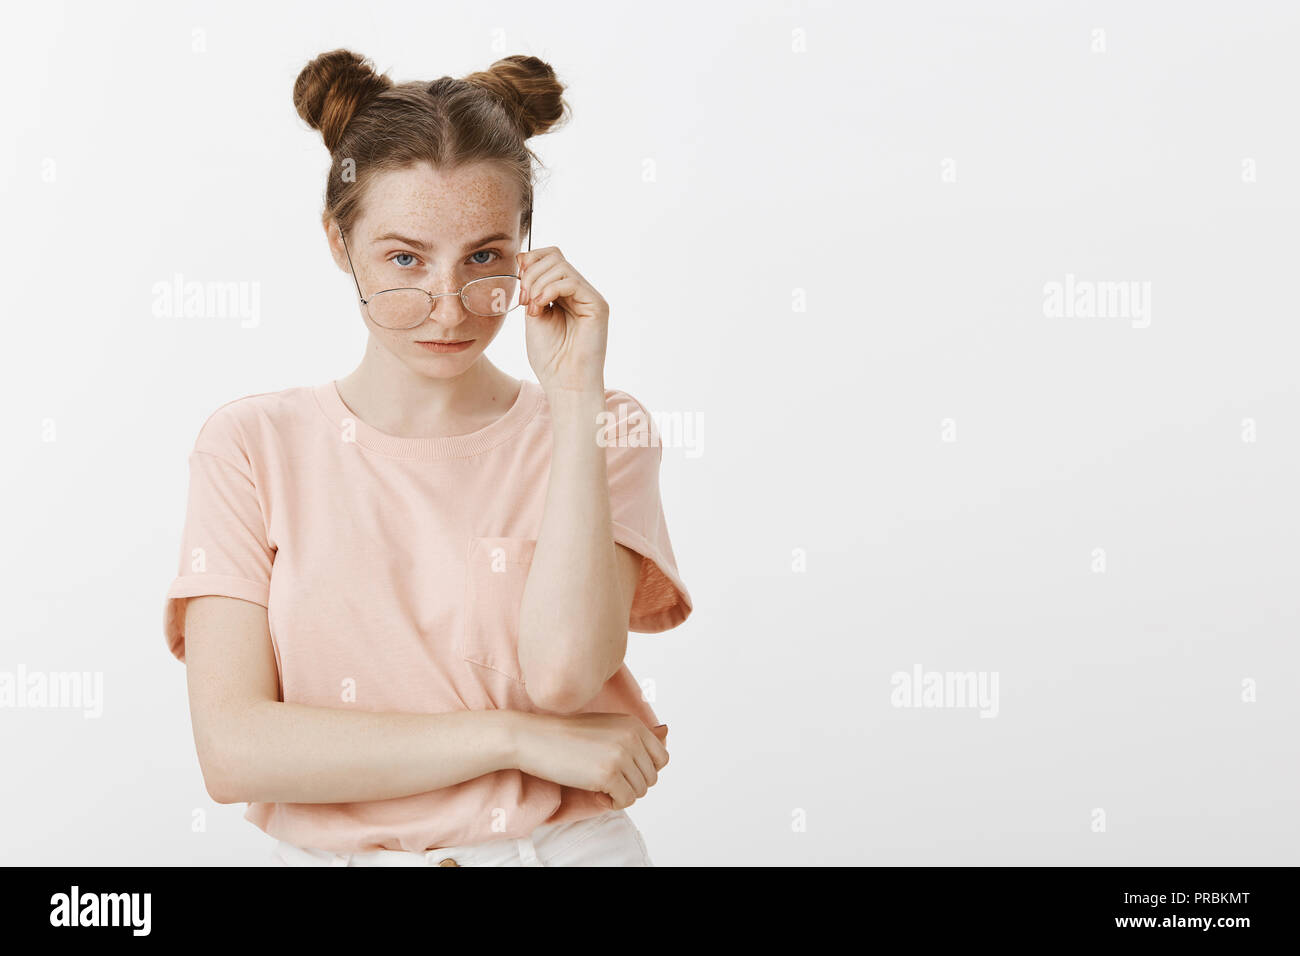 Are you sure about it. Portrait of uncertain beautiful female with buns hairstyle and freckles, taking off glasses and staring doubtfully at camera, being unsure, expressing hesitation and interest Stock Photo